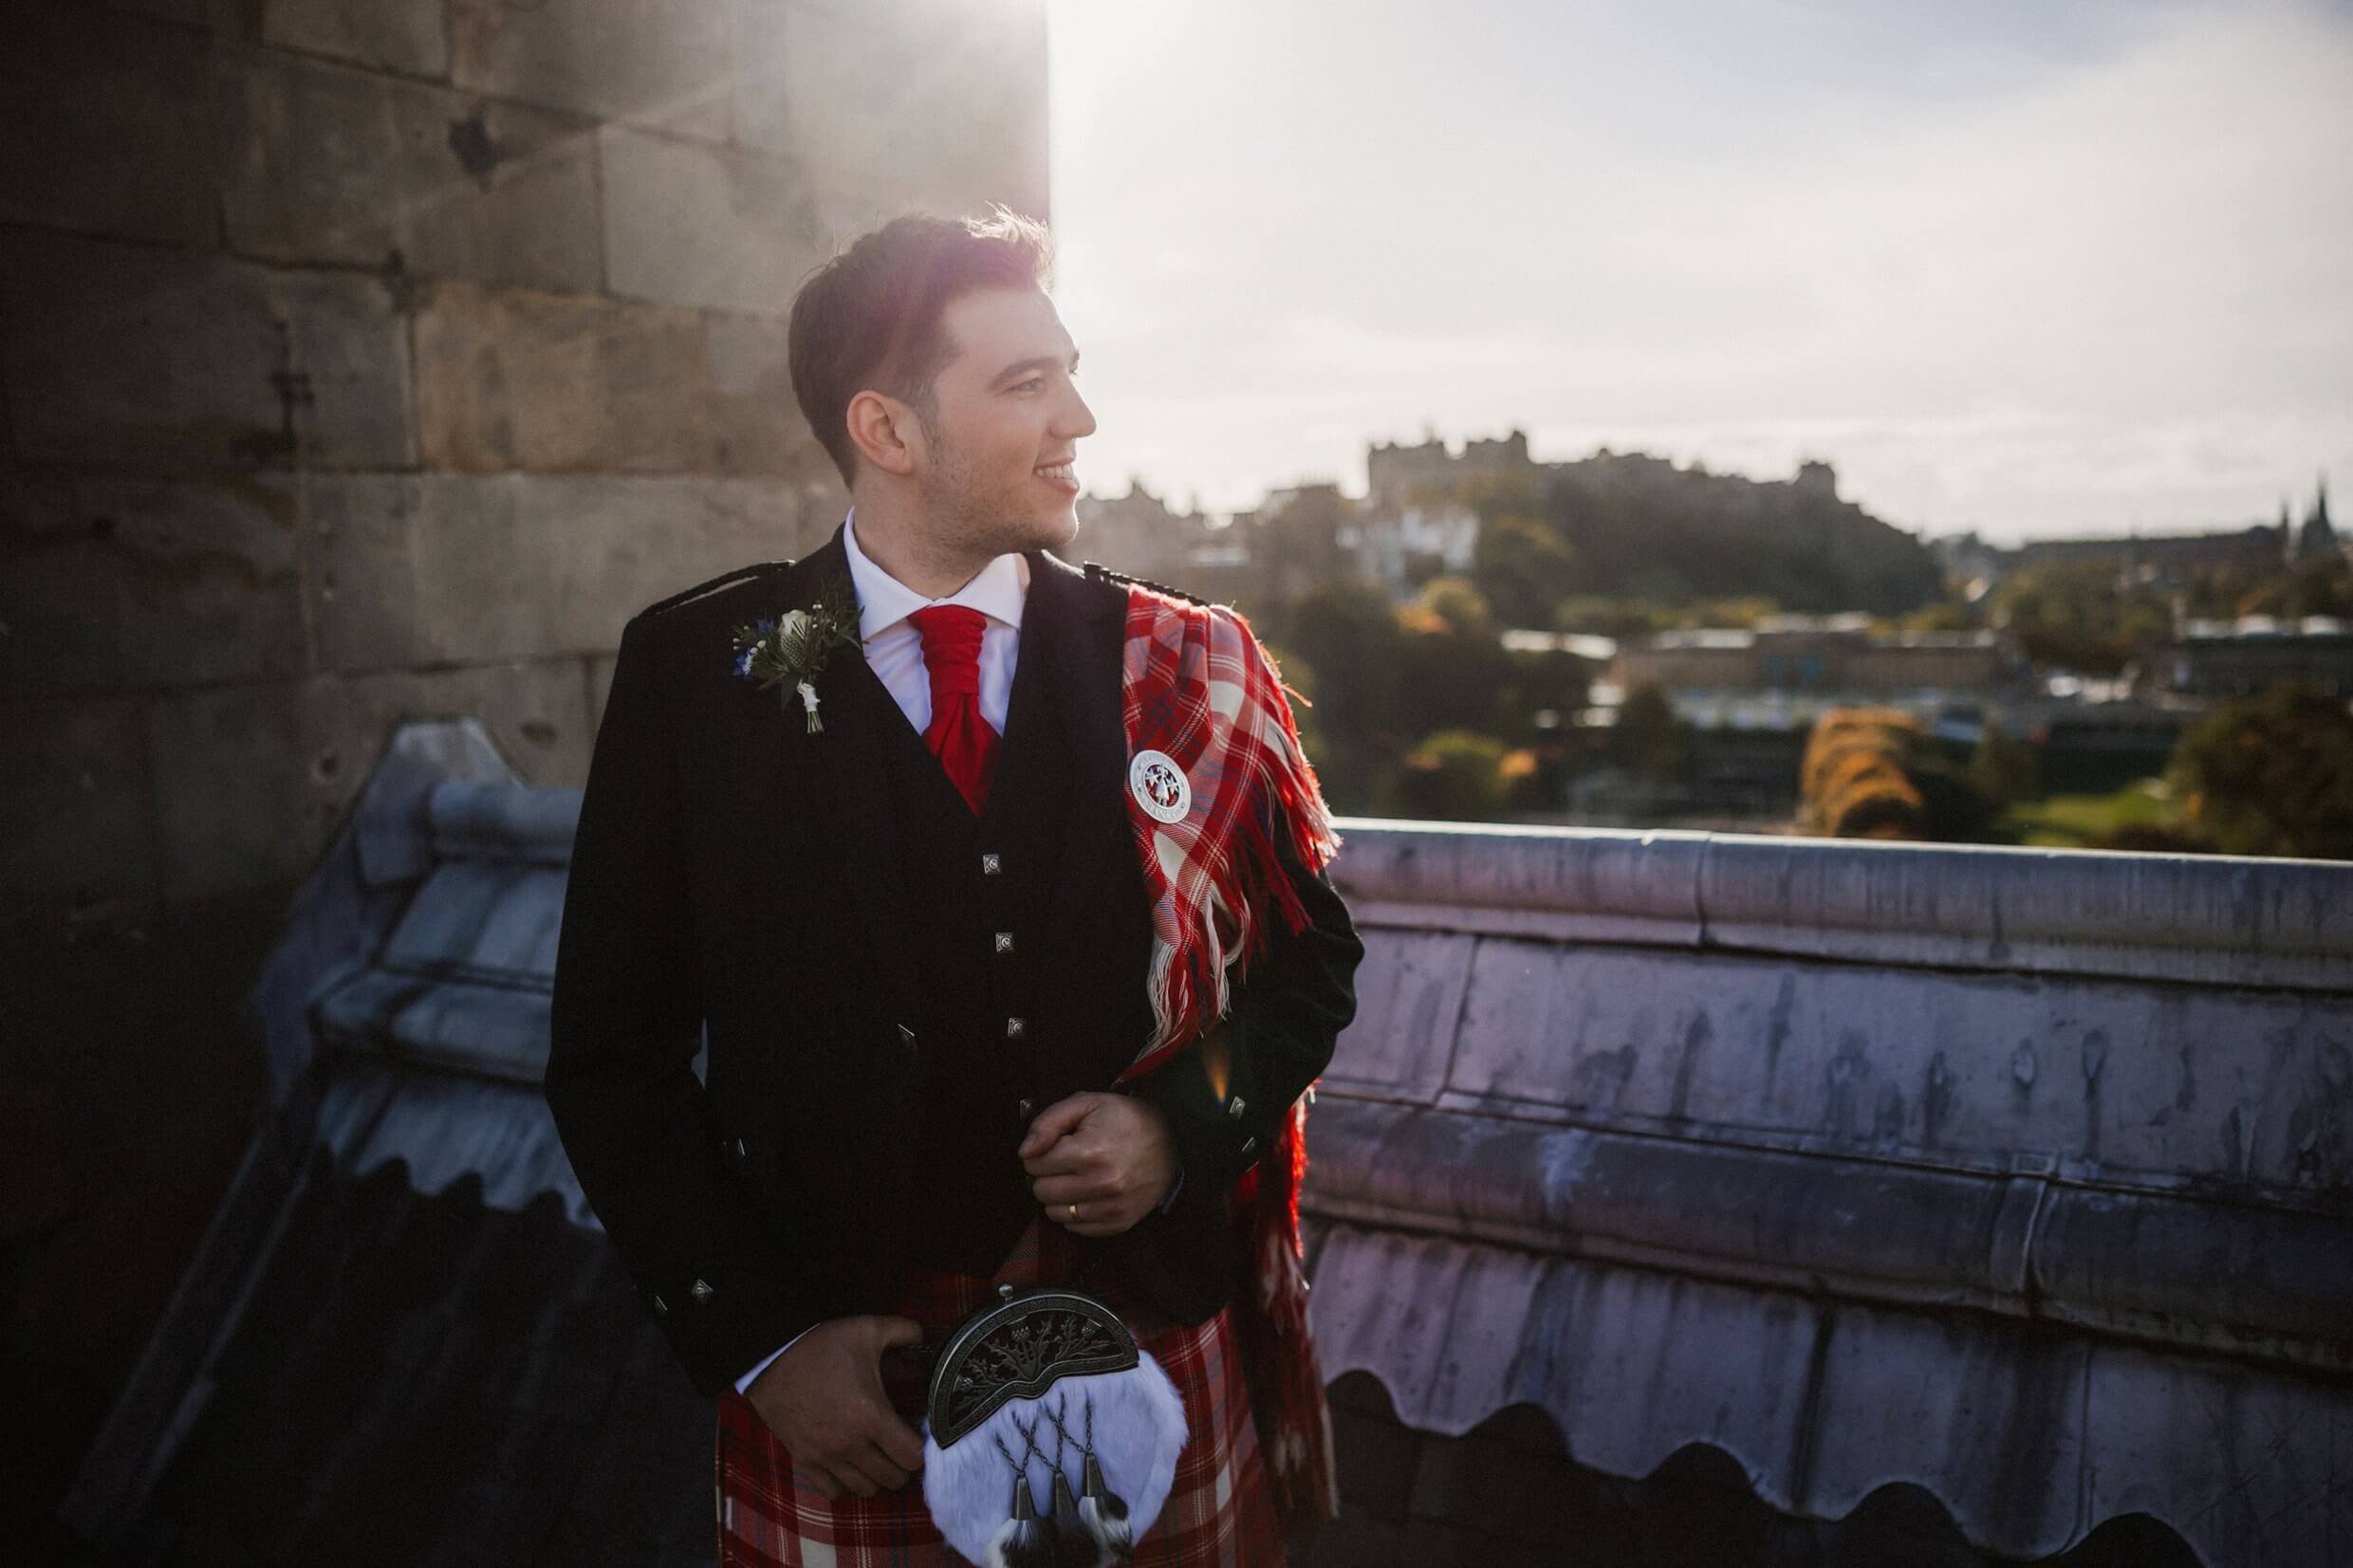 the groom poses for photos on the rooftop of the balmoral hotel edinburgh wedding venue with edinburgh castle visible in the background